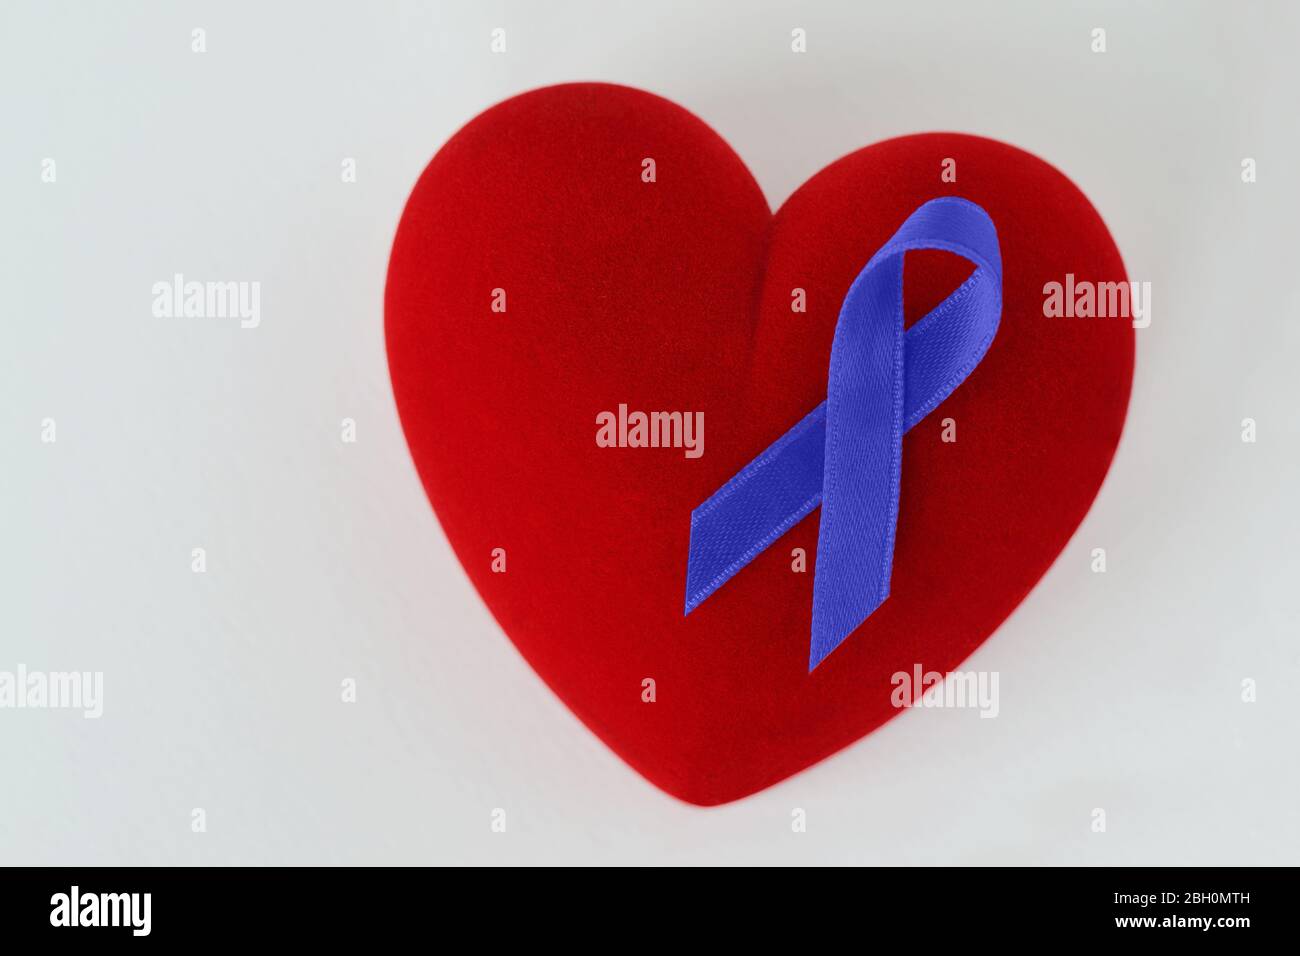 Heart with blue ribbon on white background - Concept of prostate cancer awareness Stock Photo